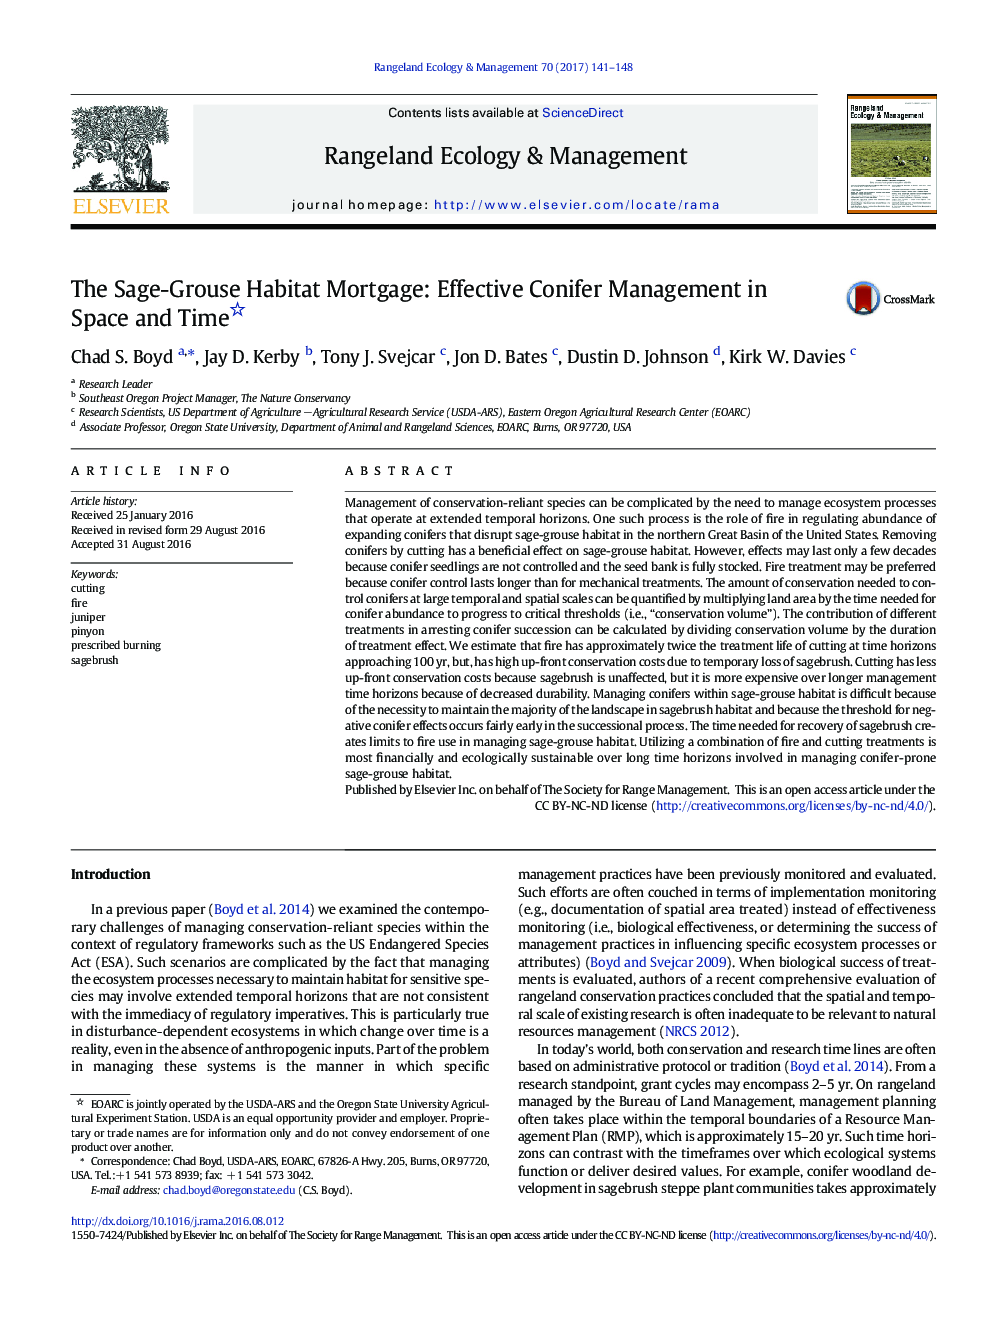 The Sage-Grouse Habitat Mortgage: Effective Conifer Management in Space and Time